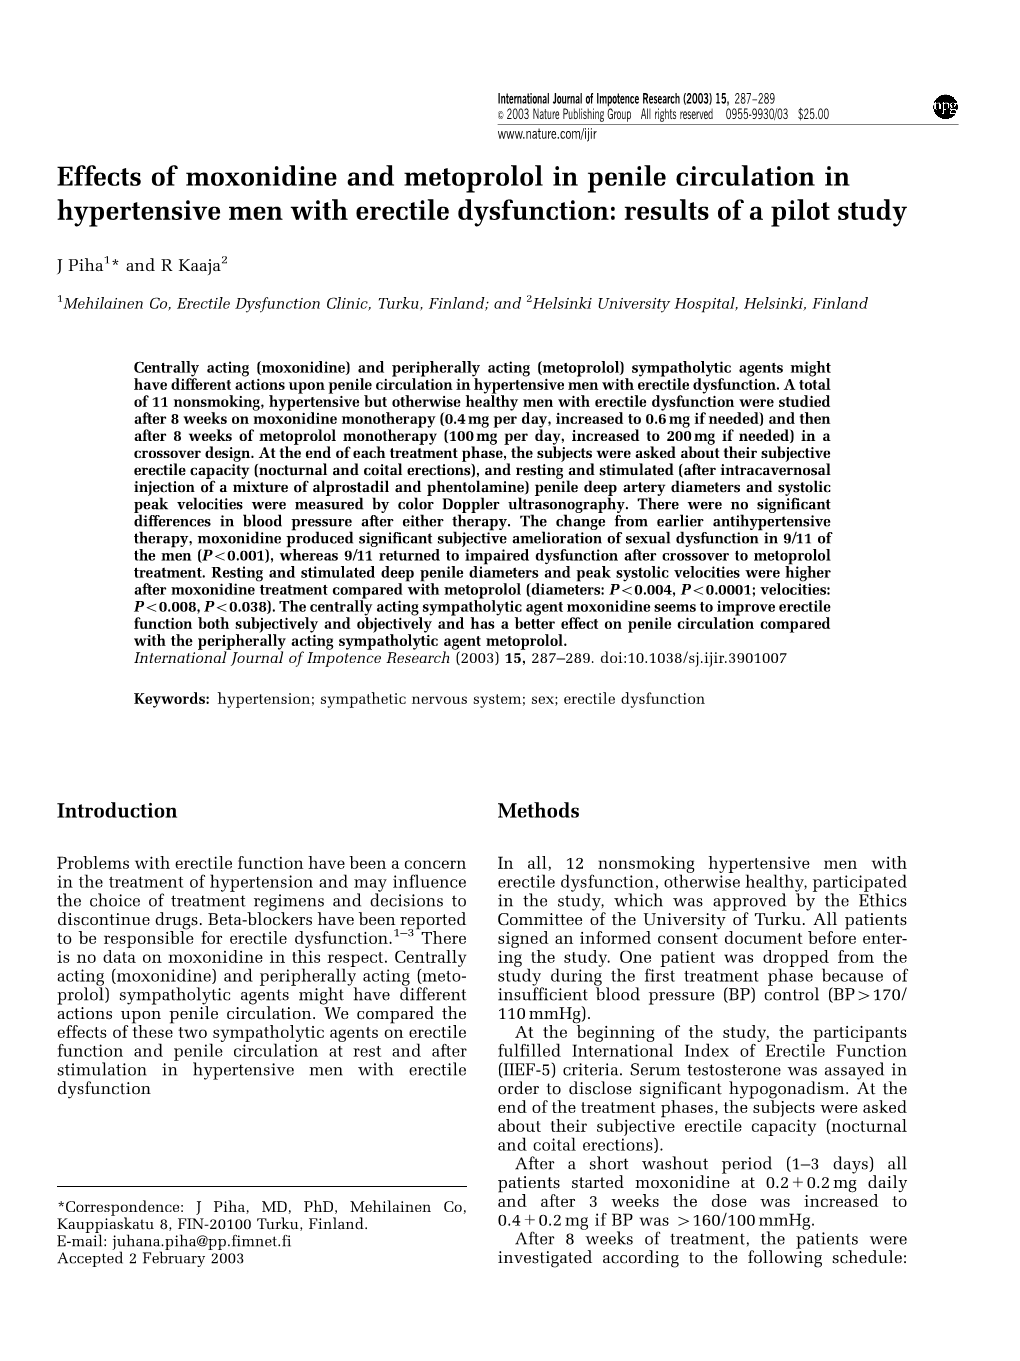 Effects of Moxonidine and Metoprolol in Penile Circulation in Hypertensive Men with Erectile Dysfunction: Results of a Pilot Study